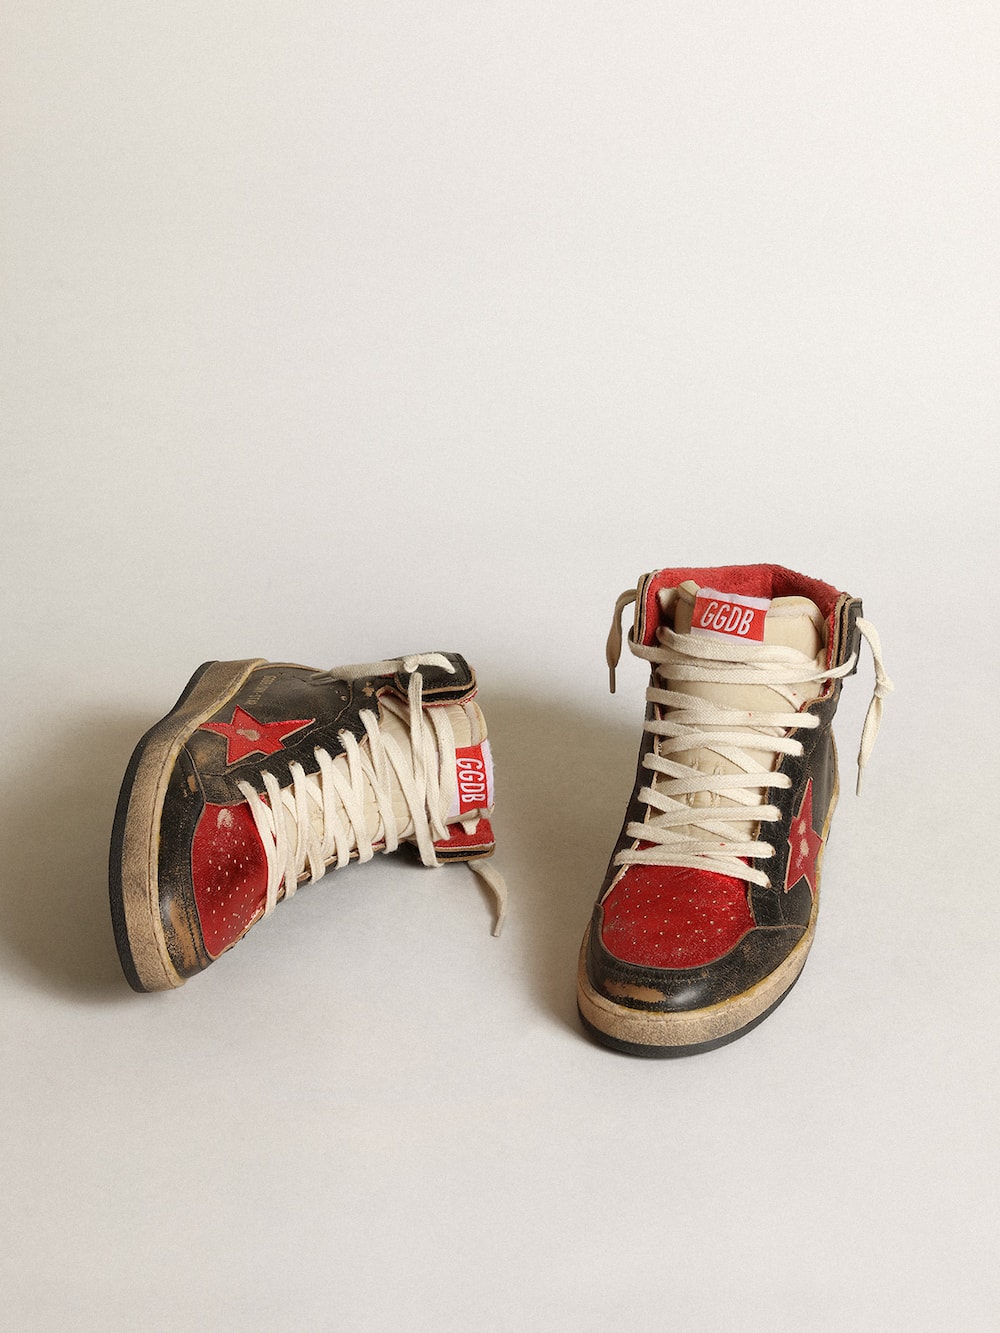 Golden Goose - Women's Sky-Star in black glossy leather with red star in 